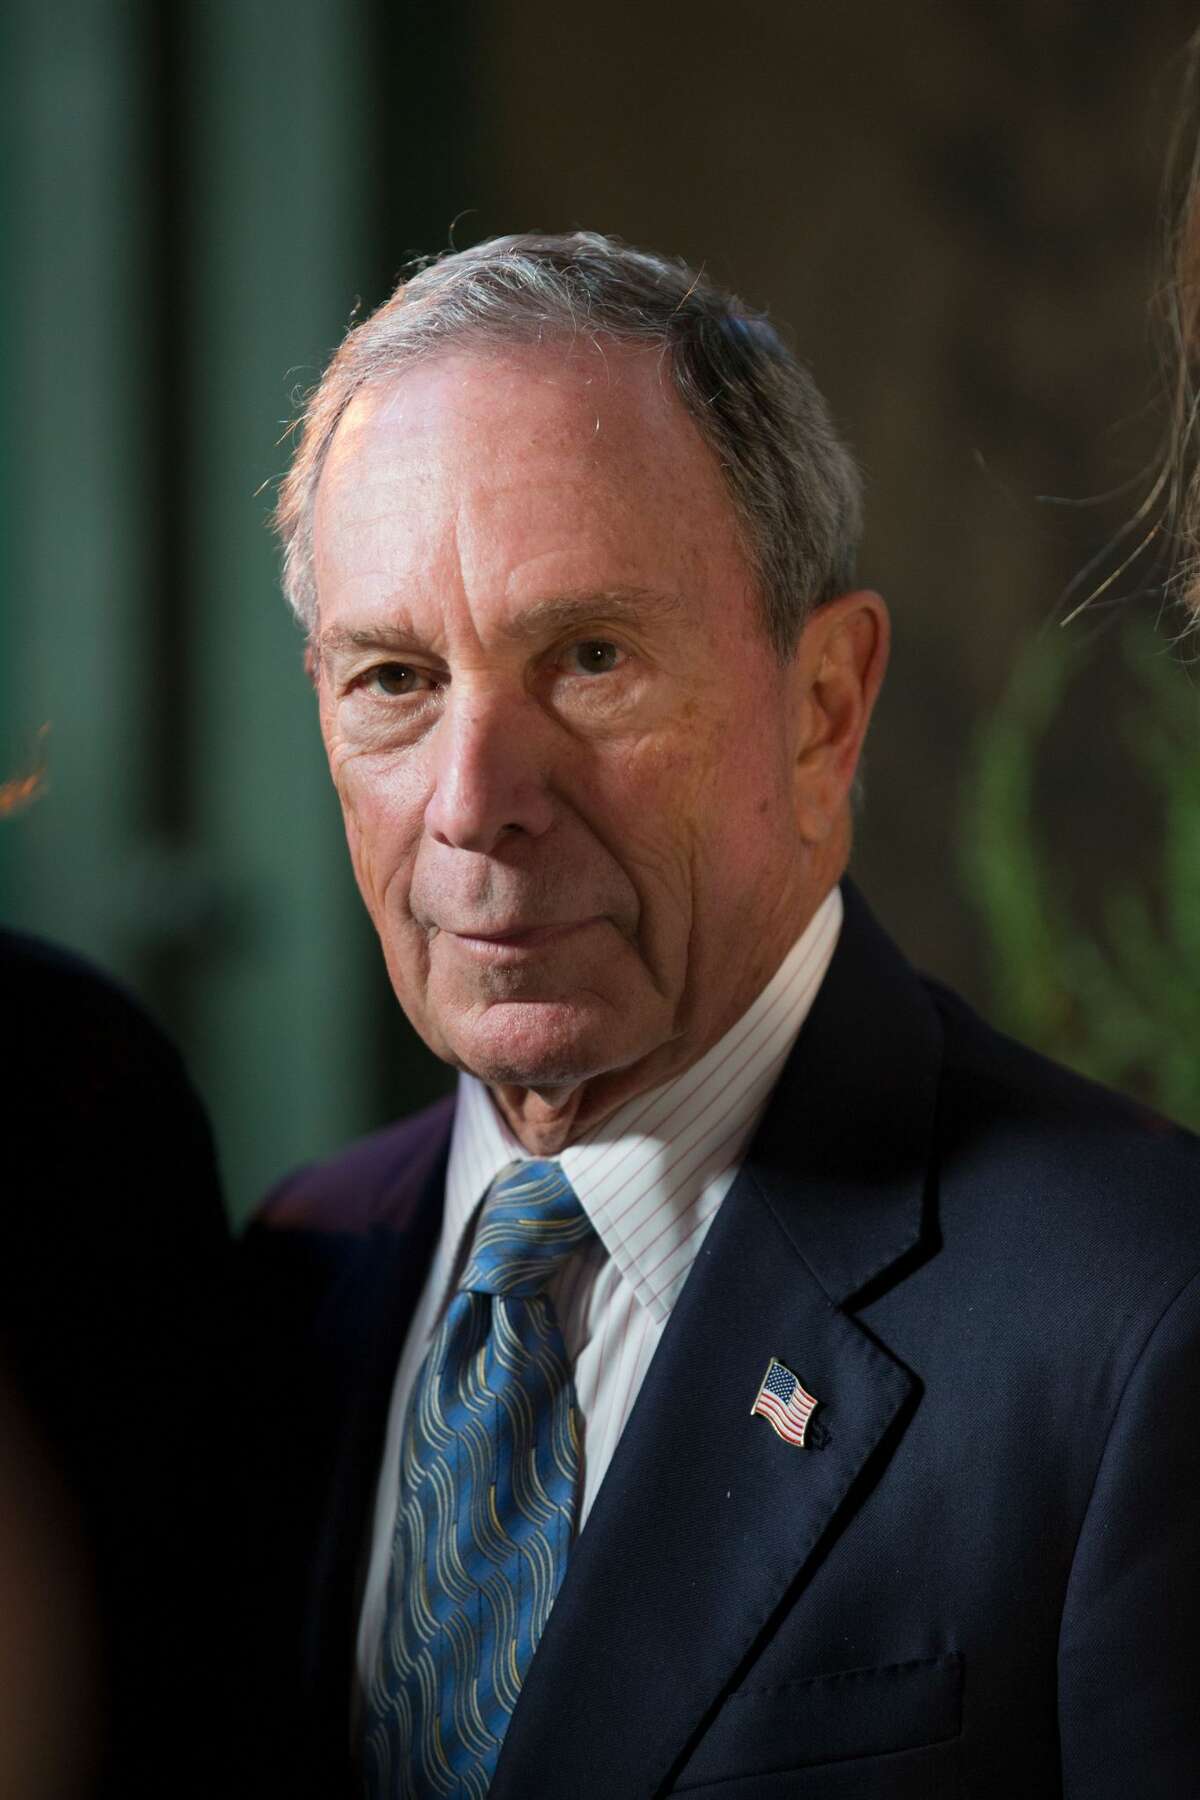 Michael Bloomberg, 77, is the 9th wealthiest person in the world, As CEO of his eponymous financial information and media company, Bloomberg is worth $55.4 billion. He lives in New York City and has donated $8 billion in his lifetime.